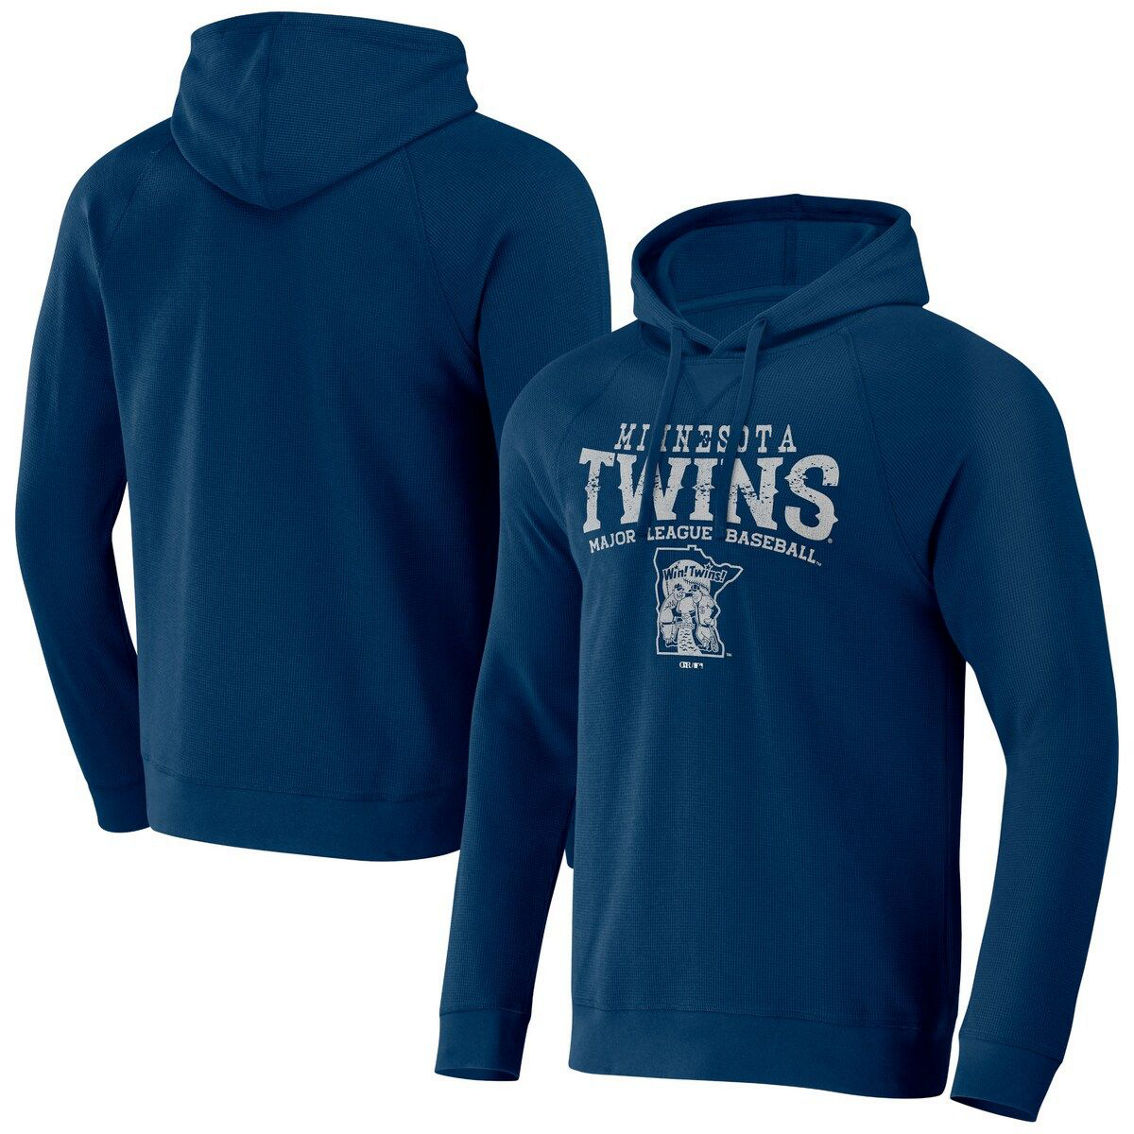 Darius Rucker Collection by Fanatics Men's Darius Rucker Collection by Fanatics Navy Minnesota Twins Waffle-Knit Raglan Pullover Hoodie - Image 2 of 4